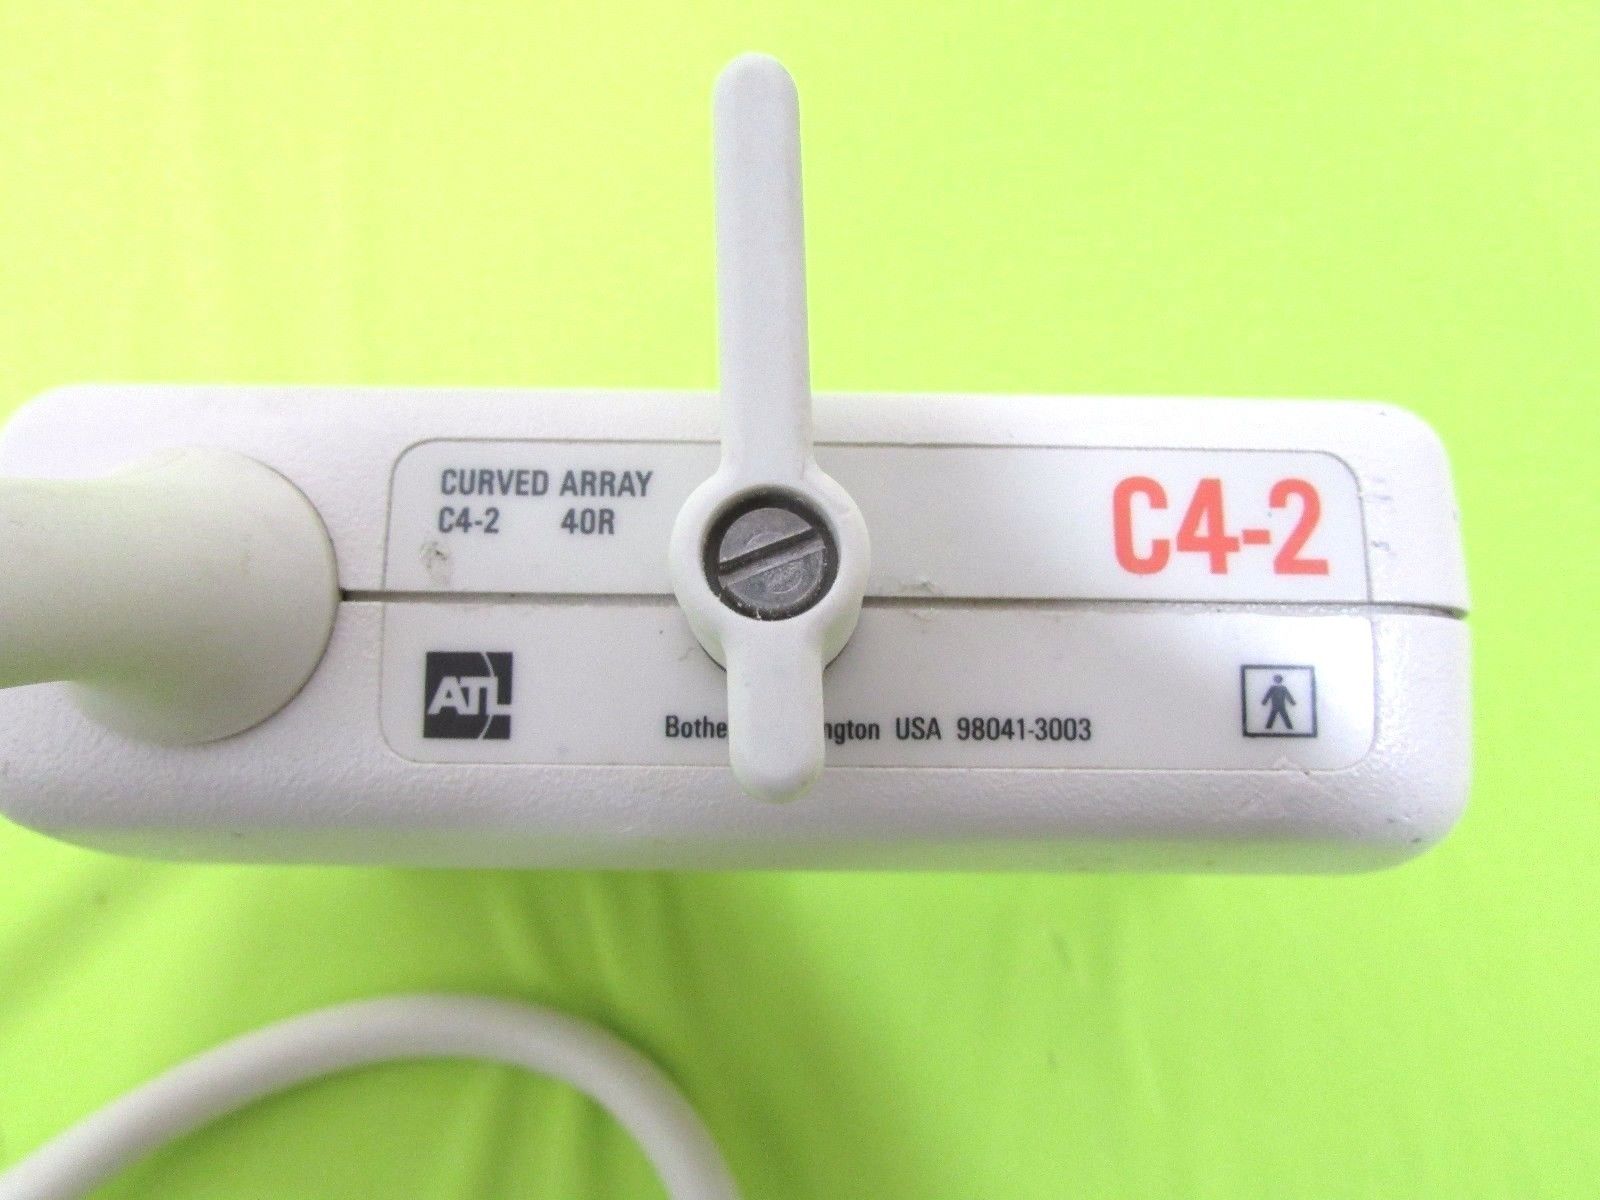 ATL C4-2 CURVED ARRAY ULTRASOUND TRANSDUCER / PROBE ! DIAGNOSTIC ULTRASOUND MACHINES FOR SALE